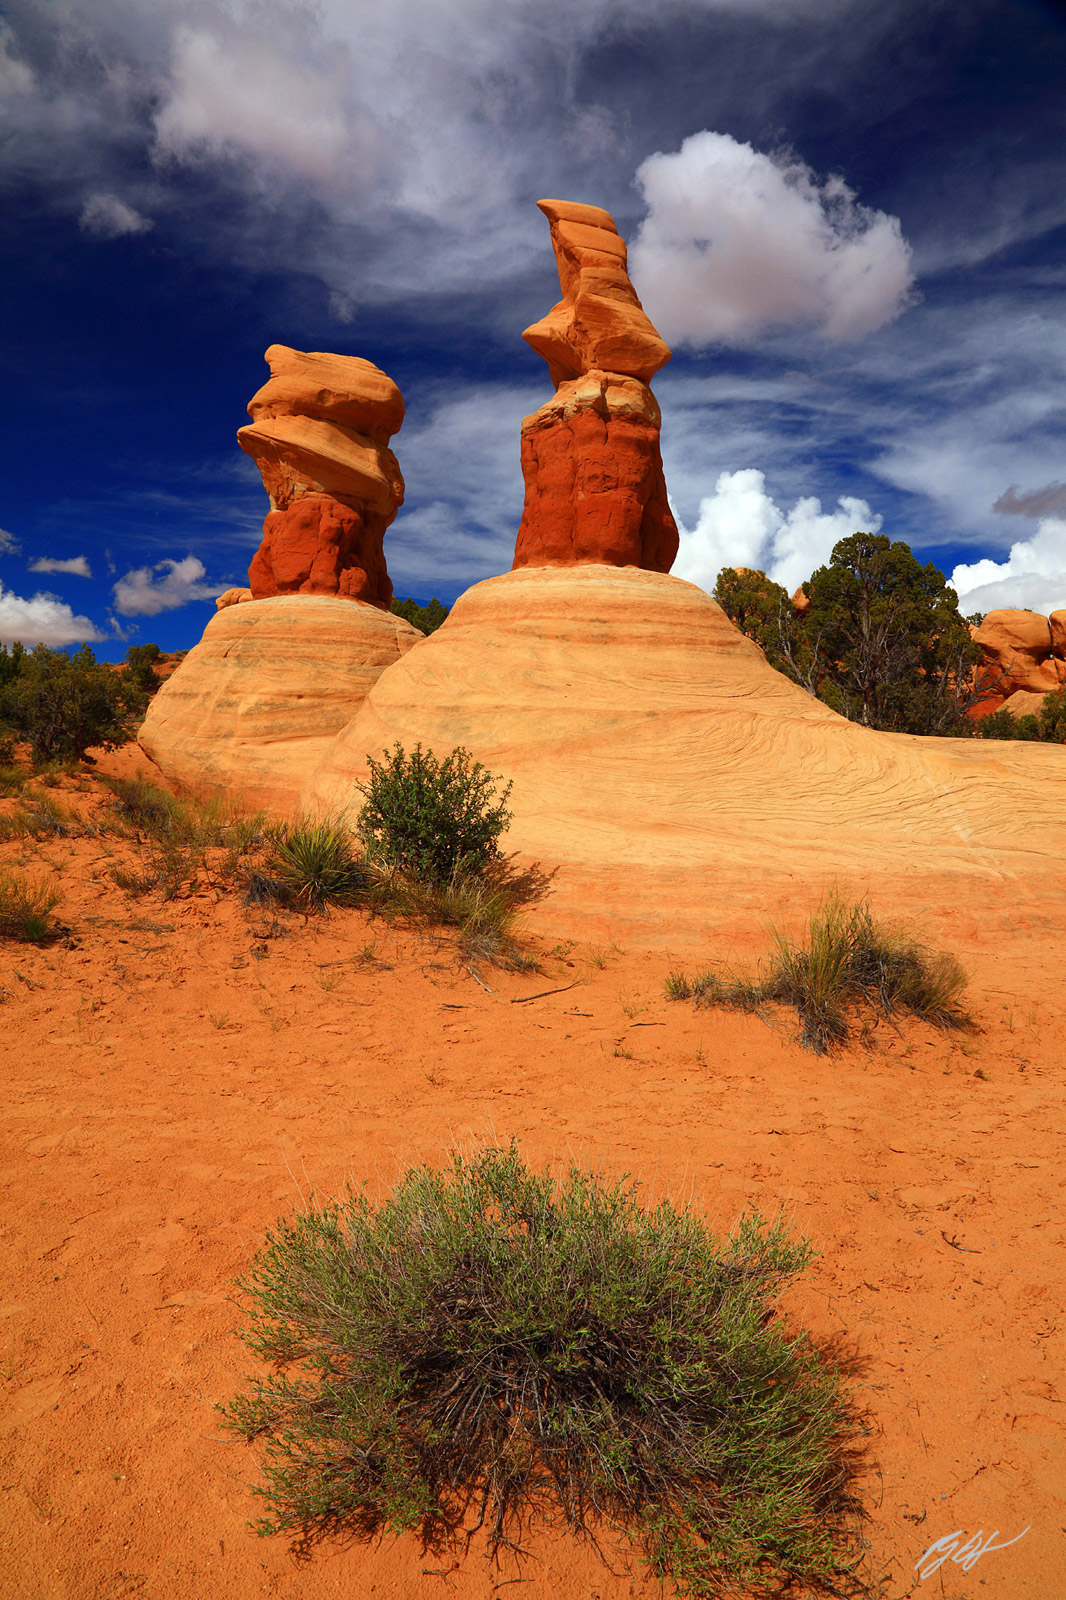 Hoodoo Rock Formations in Devils Garden in the Grand Staircase-Escalante National Monument in Utah